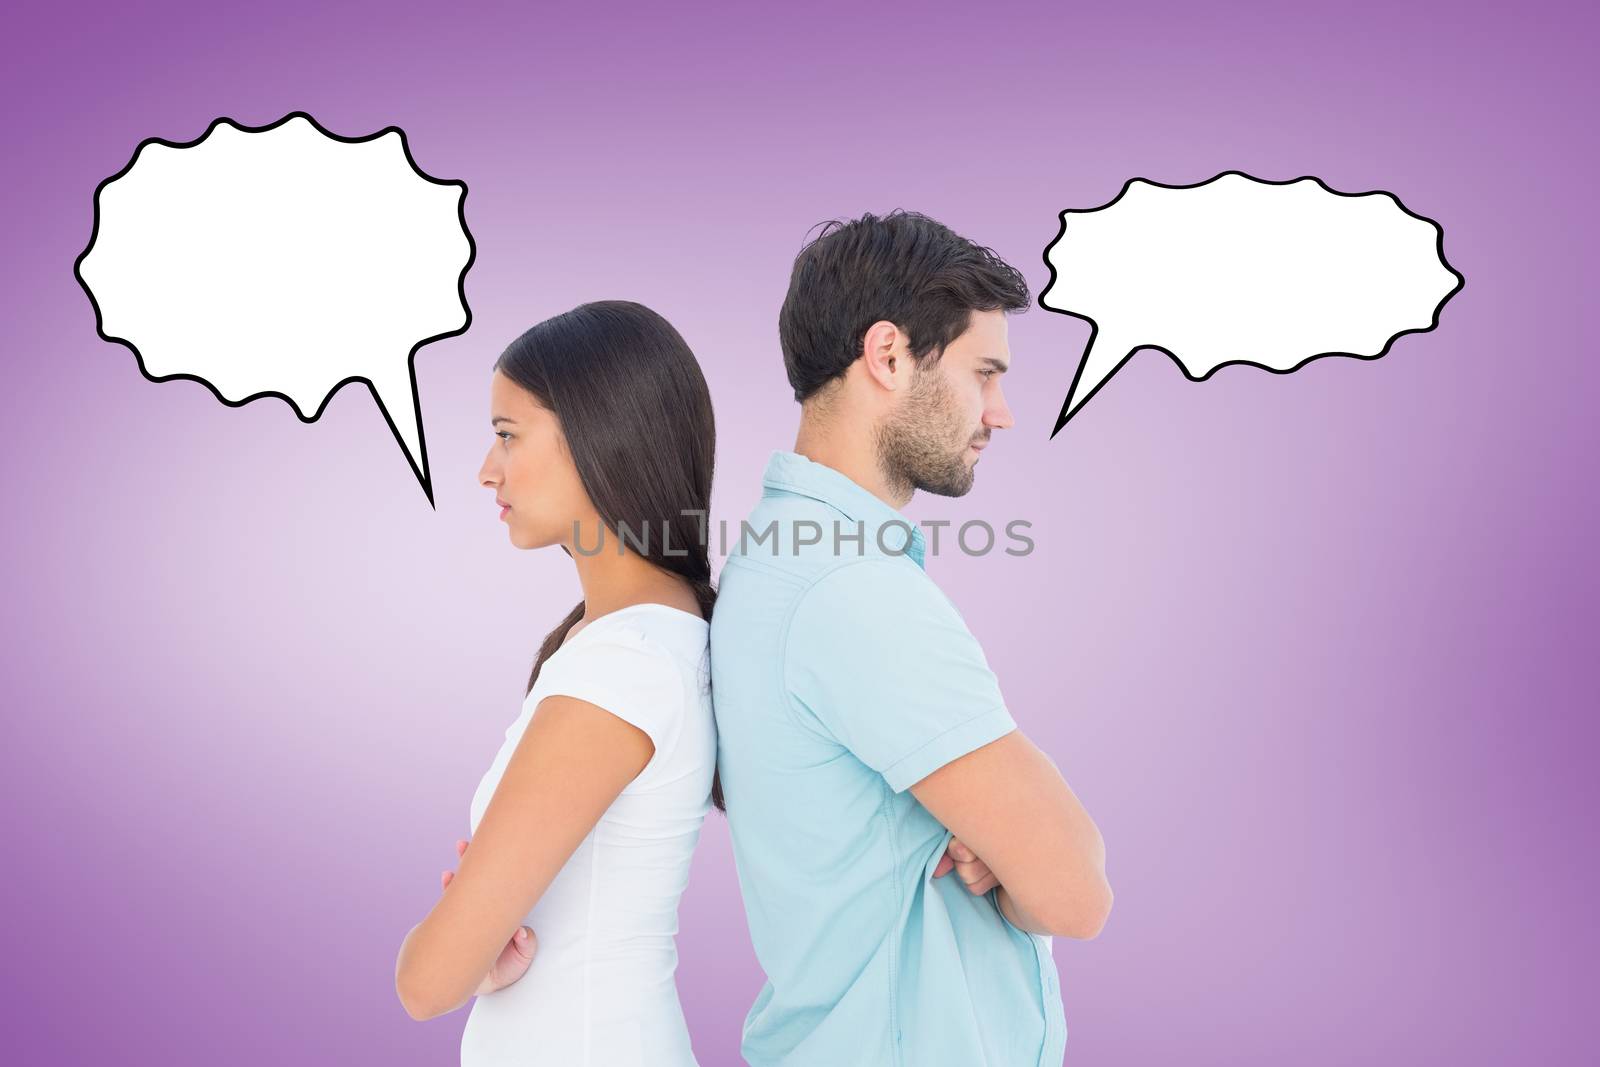 Unhappy couple not speaking to each other  against purple vignette